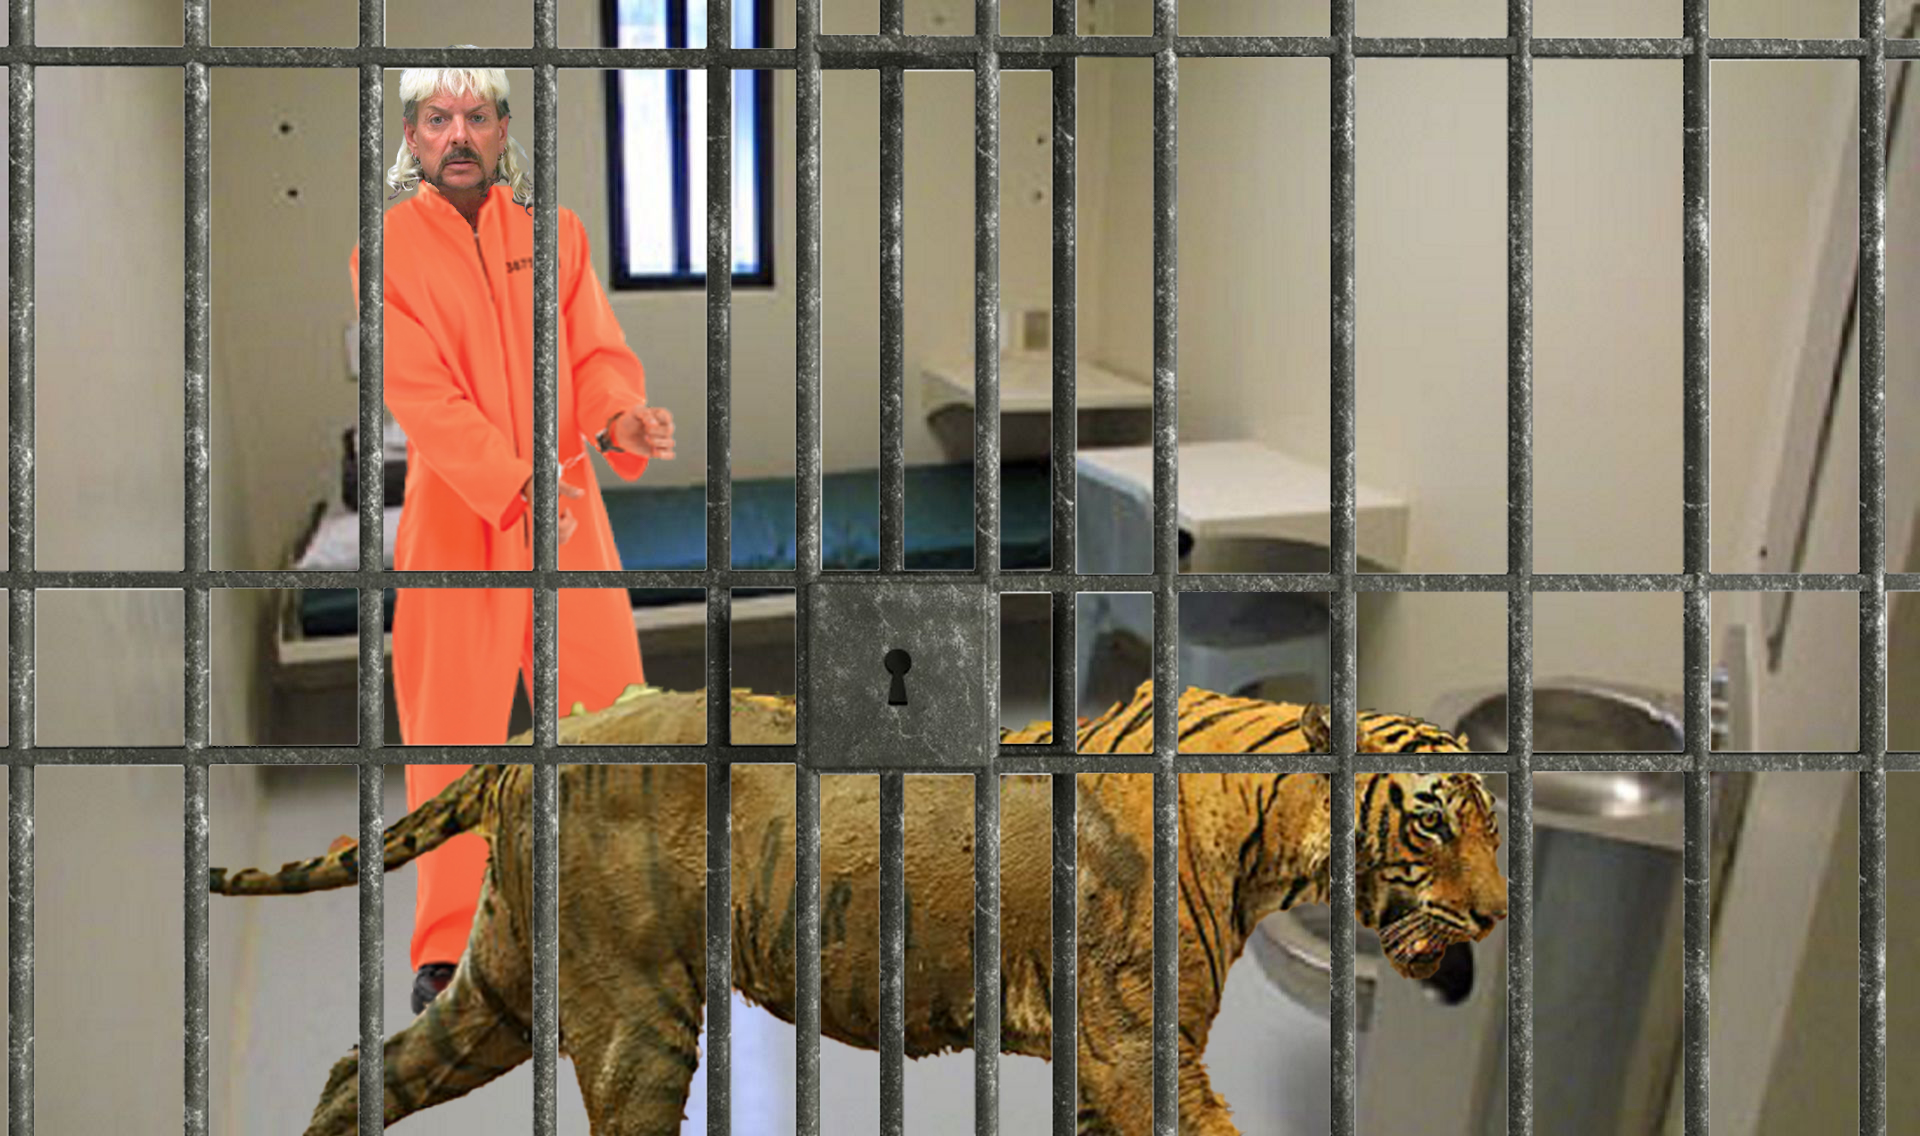 Feces Covered Tiger Smuggled Into Prison, Confiscated From Joe Exotic’s Cell